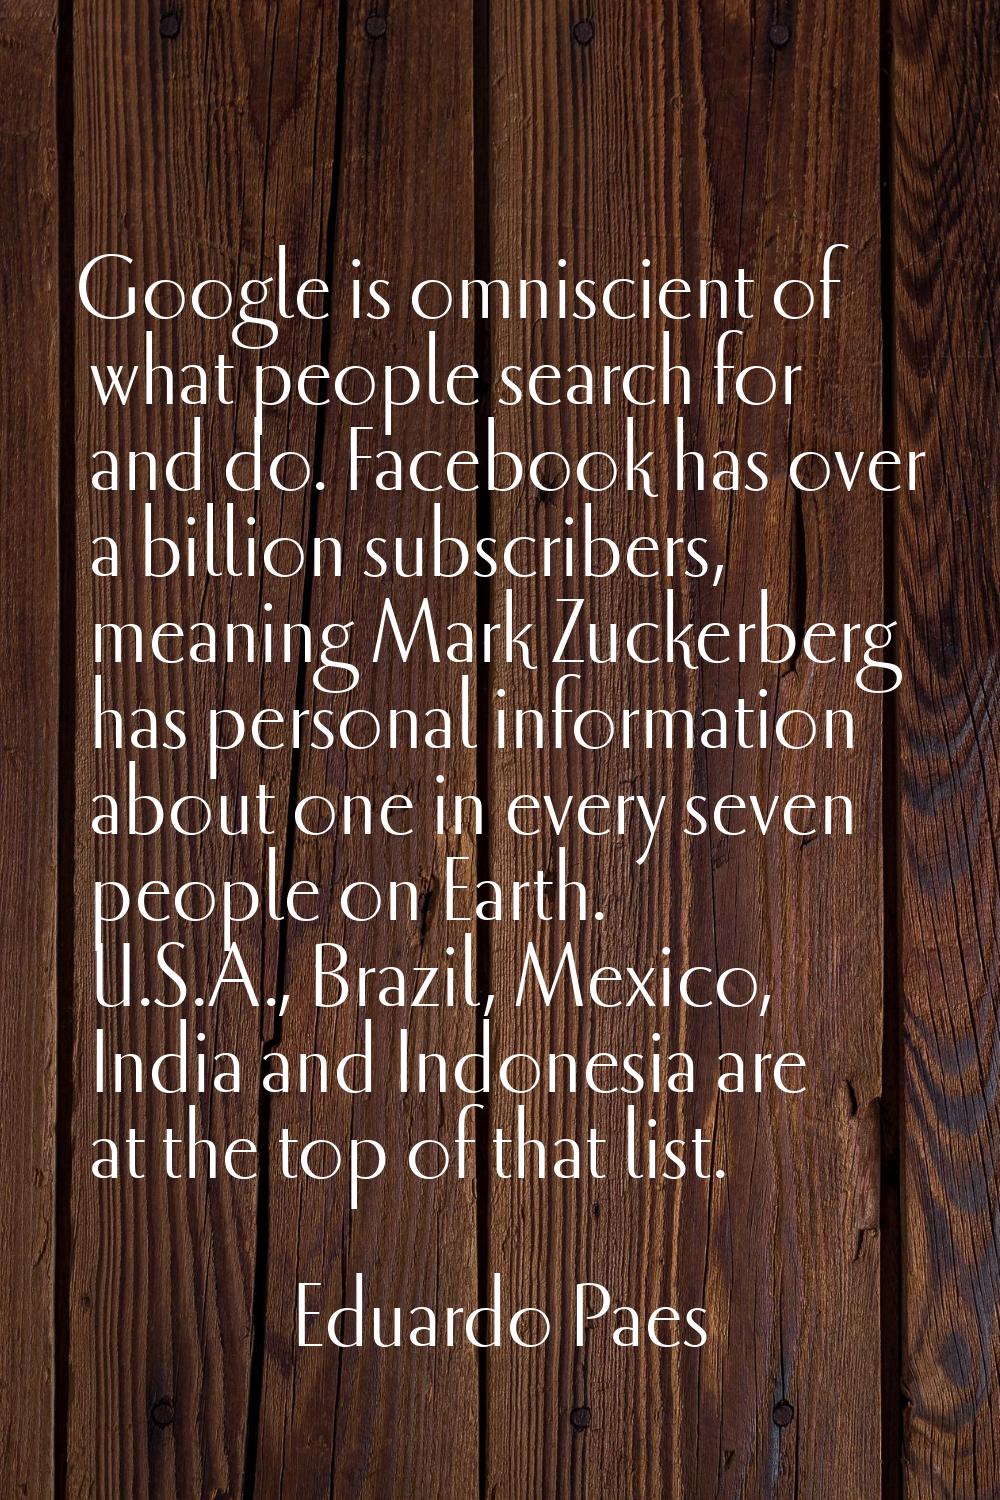 Google is omniscient of what people search for and do. Facebook has over a billion subscribers, mea